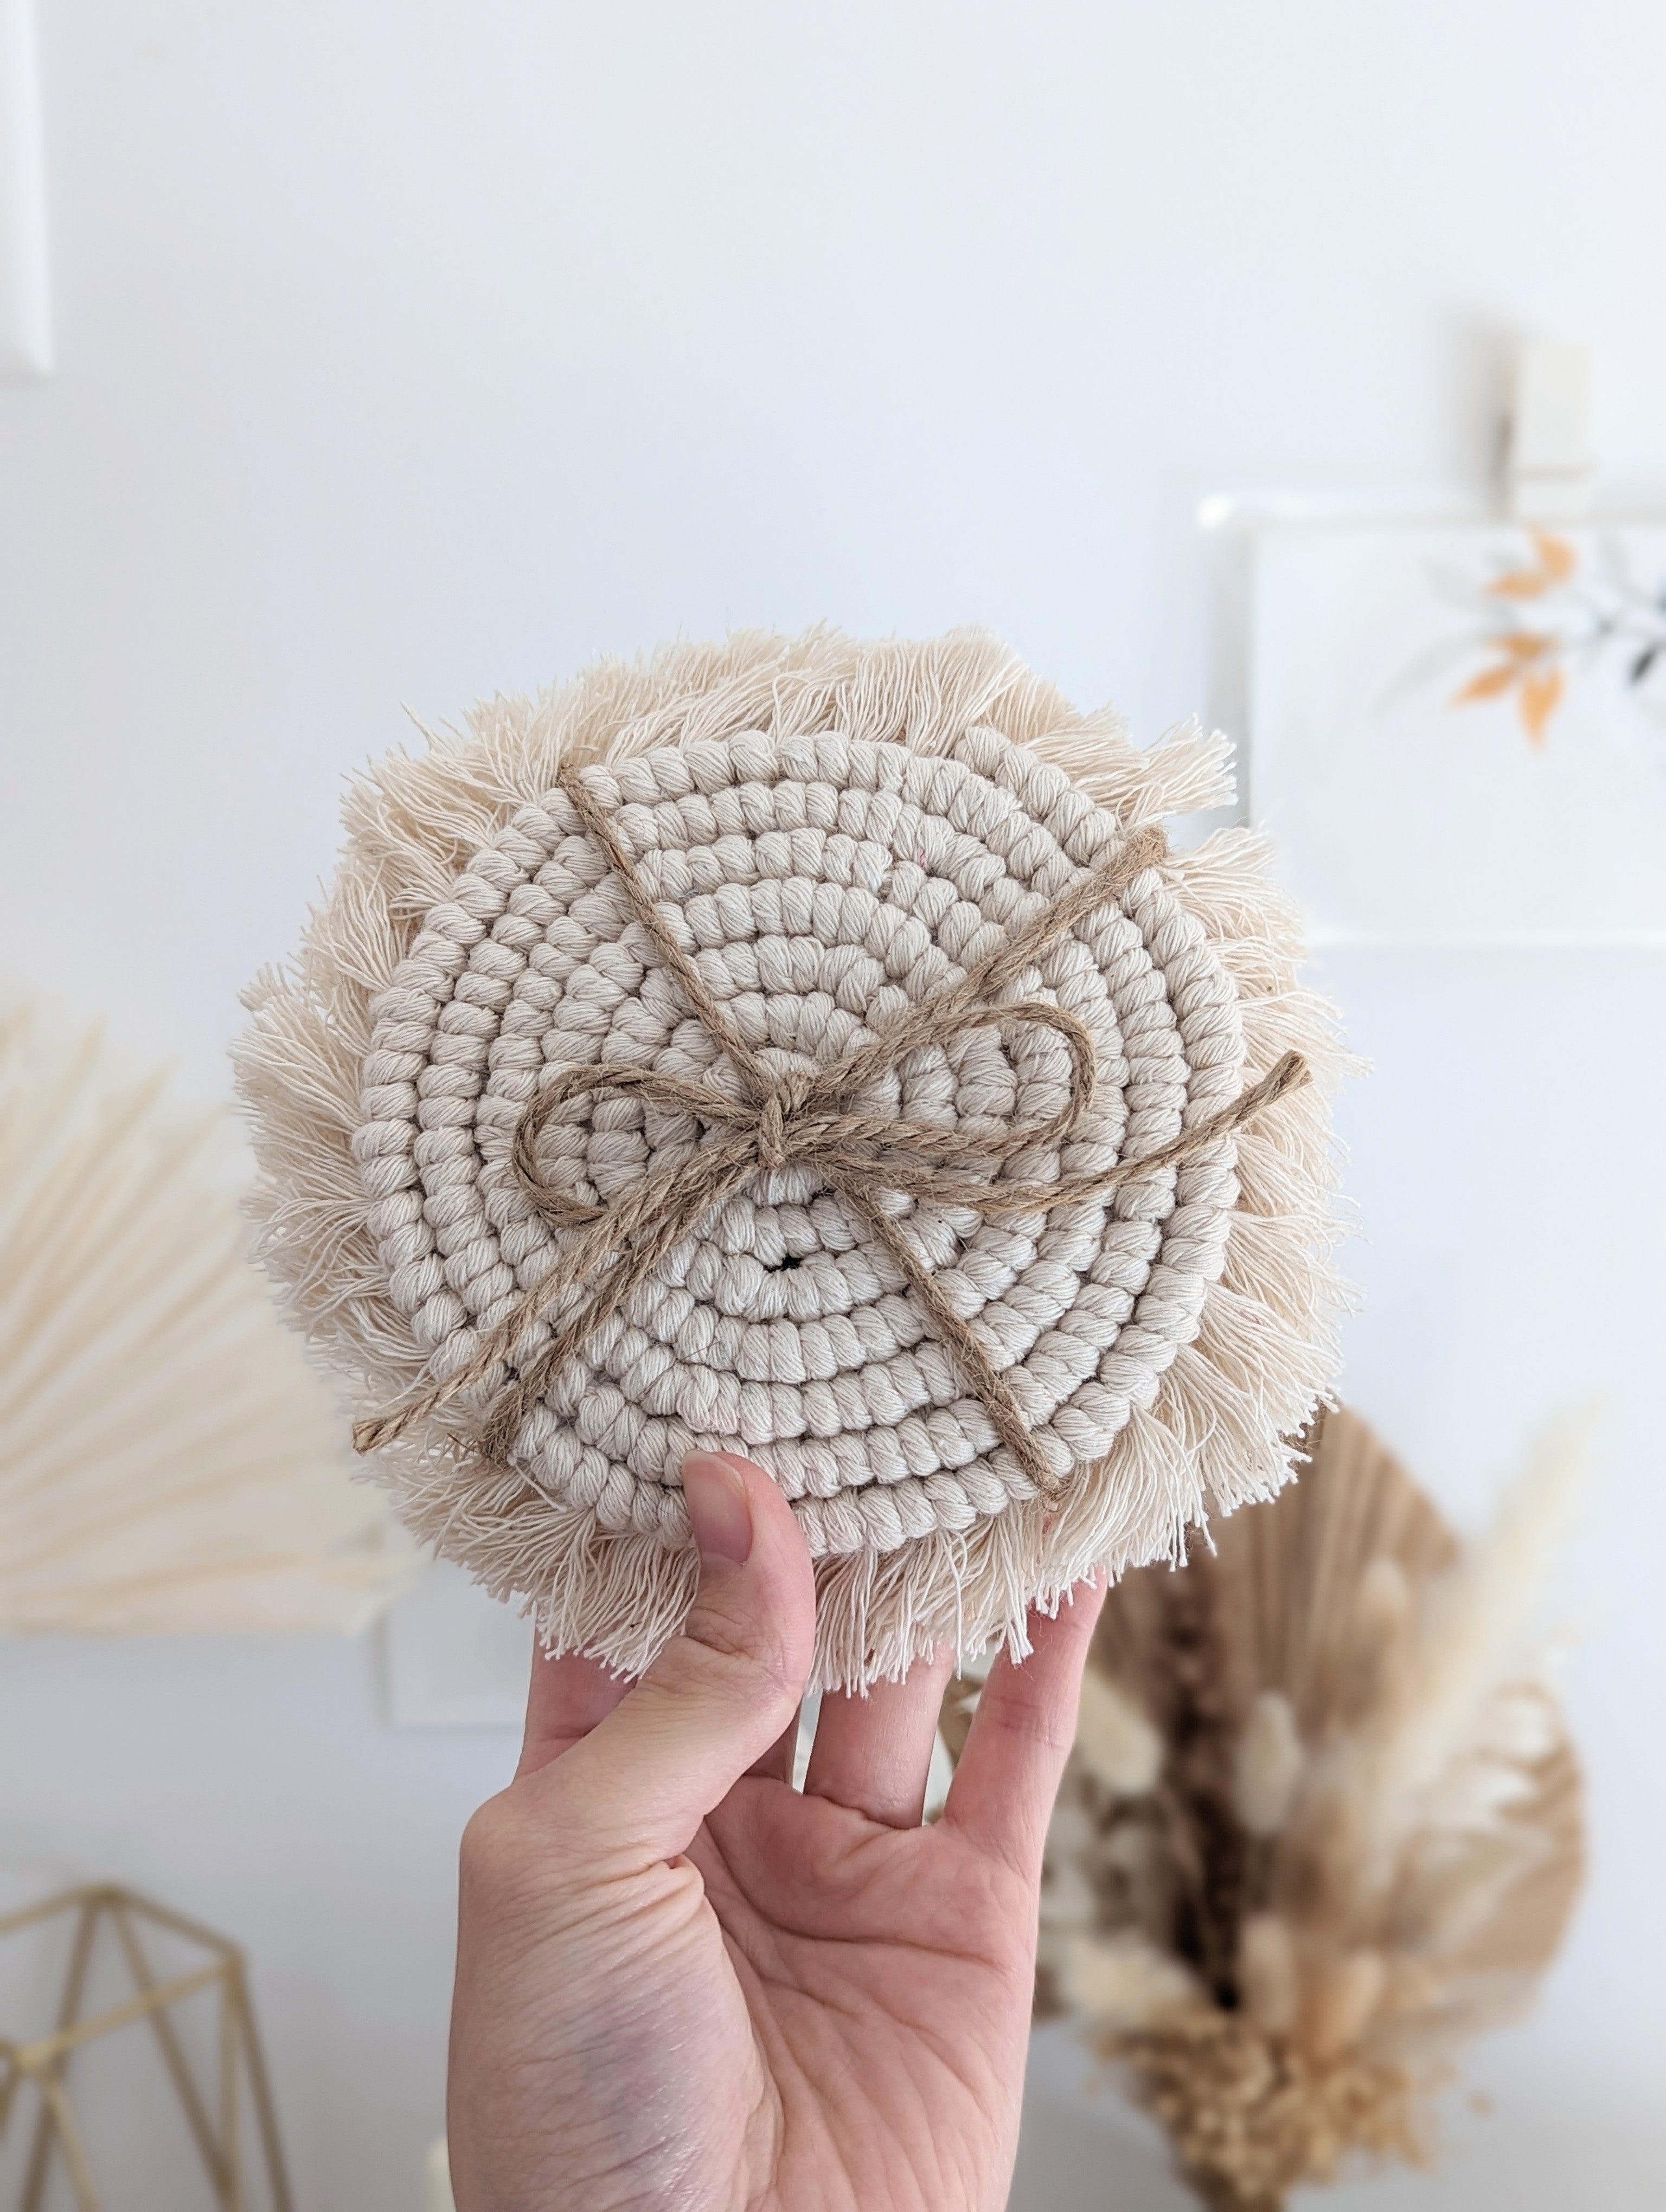 2 PACK: Recycled Cotton Coasters by KNOTTYMONKEY